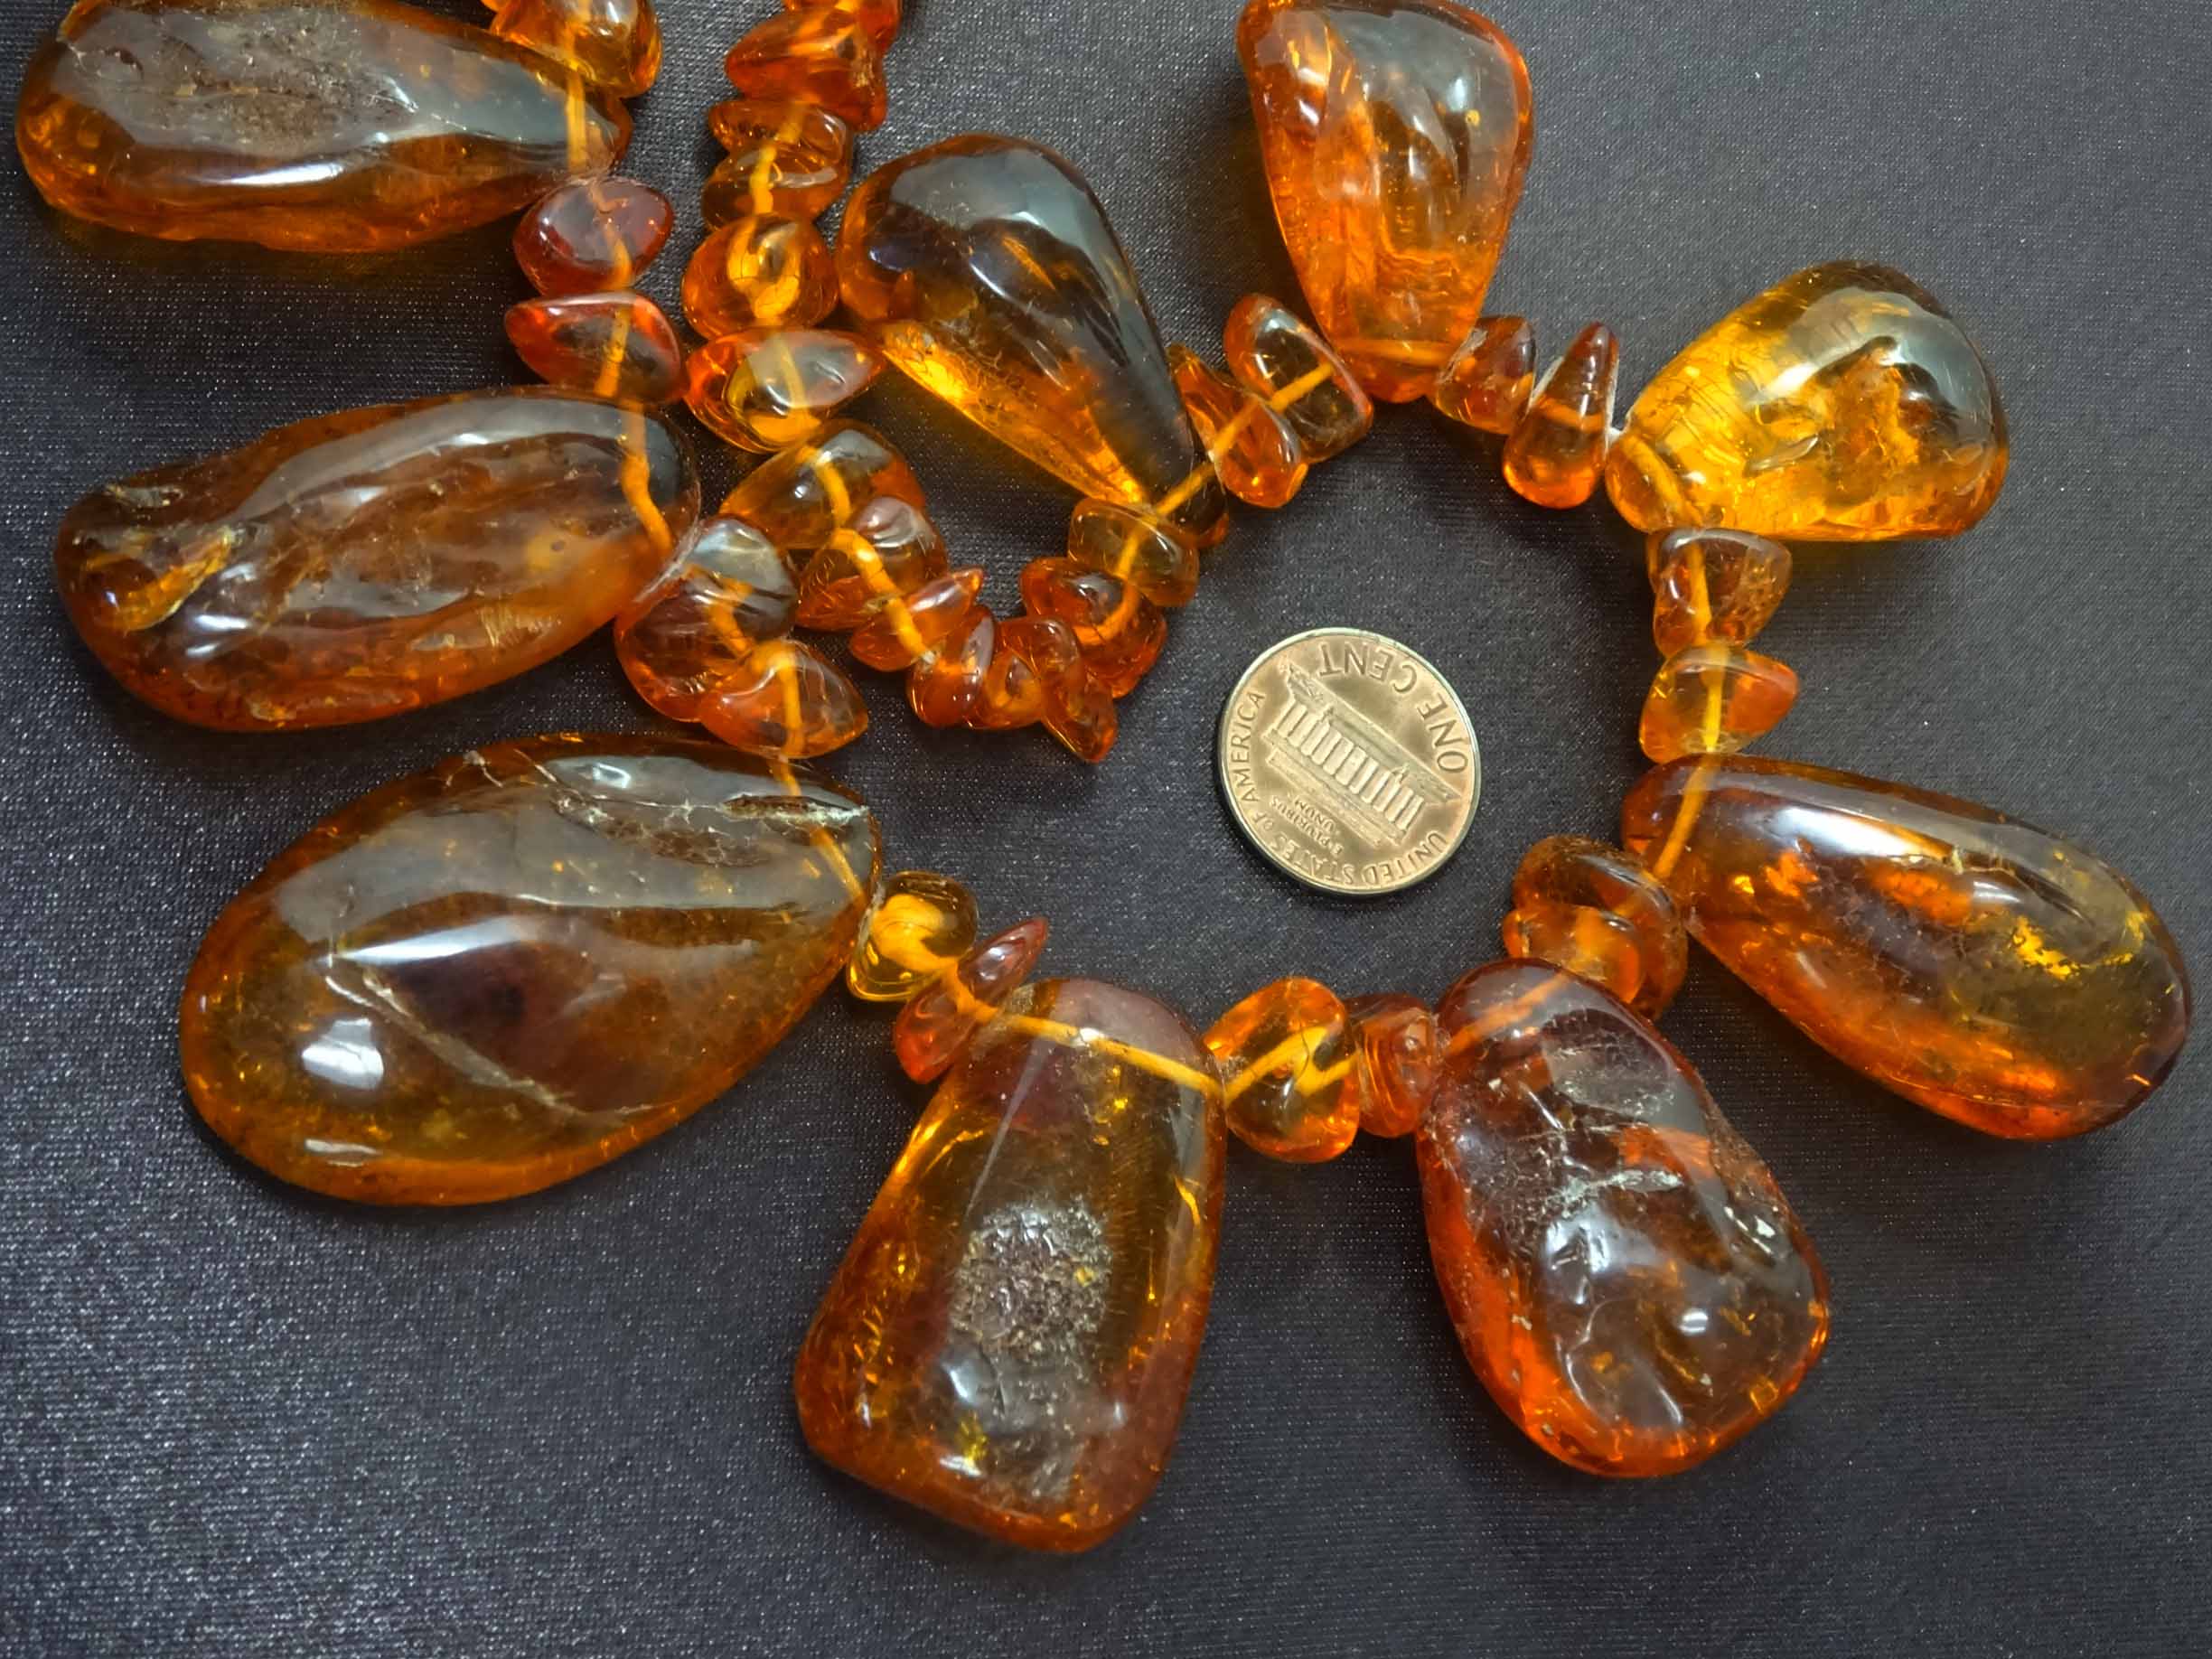 I cleaned this incorrect now my amber necklace is cloudy. : r/jewelry